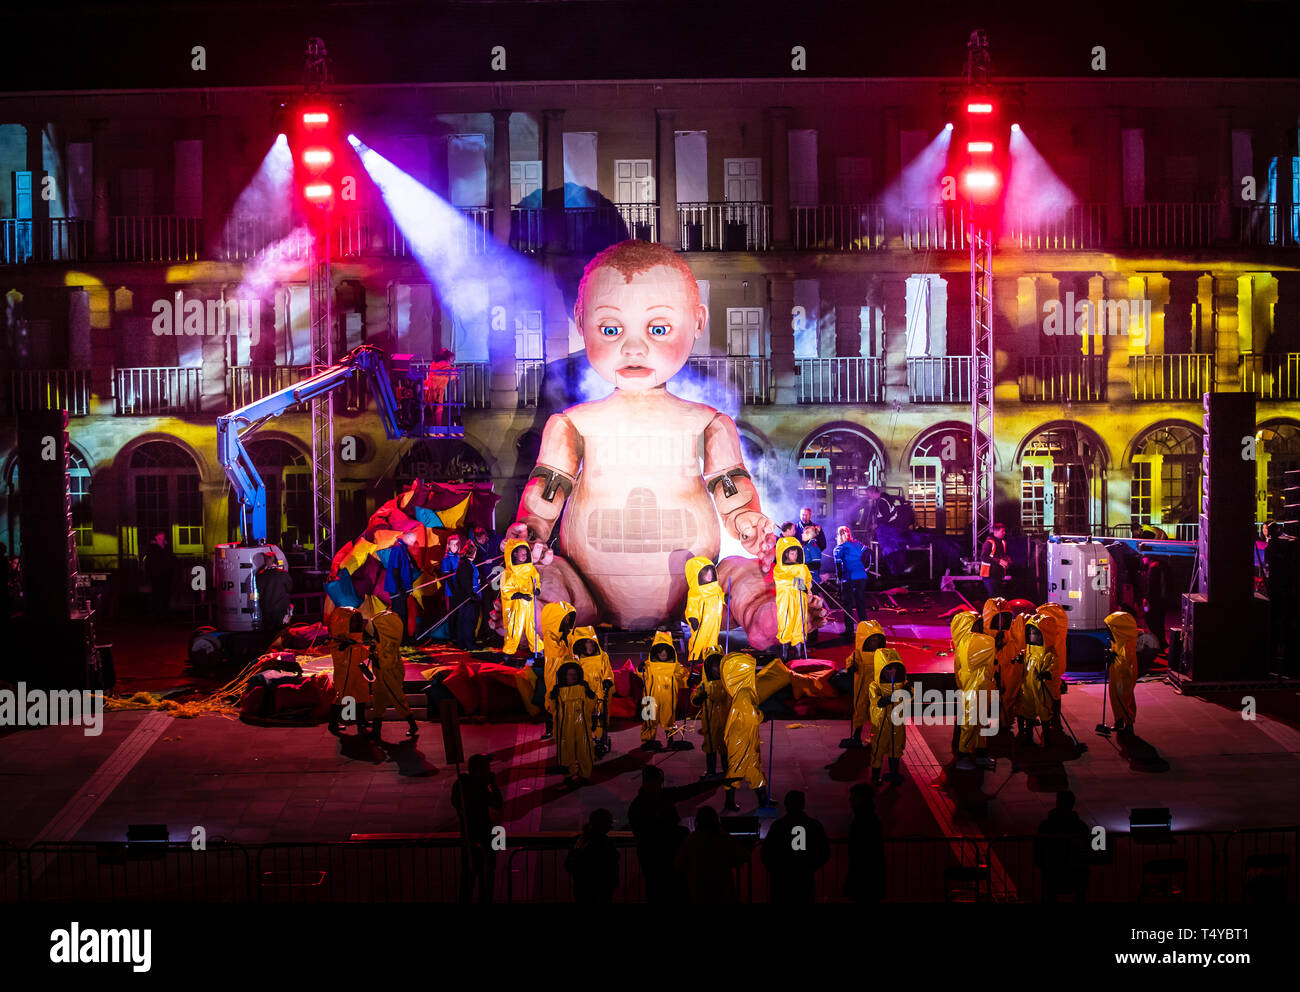 A dress rehearsal for Zara, a huge outdoor theatre production featuring a  Giant baby, at the Piece Hall in Halifax, Yorkshire Stock Photo - Alamy